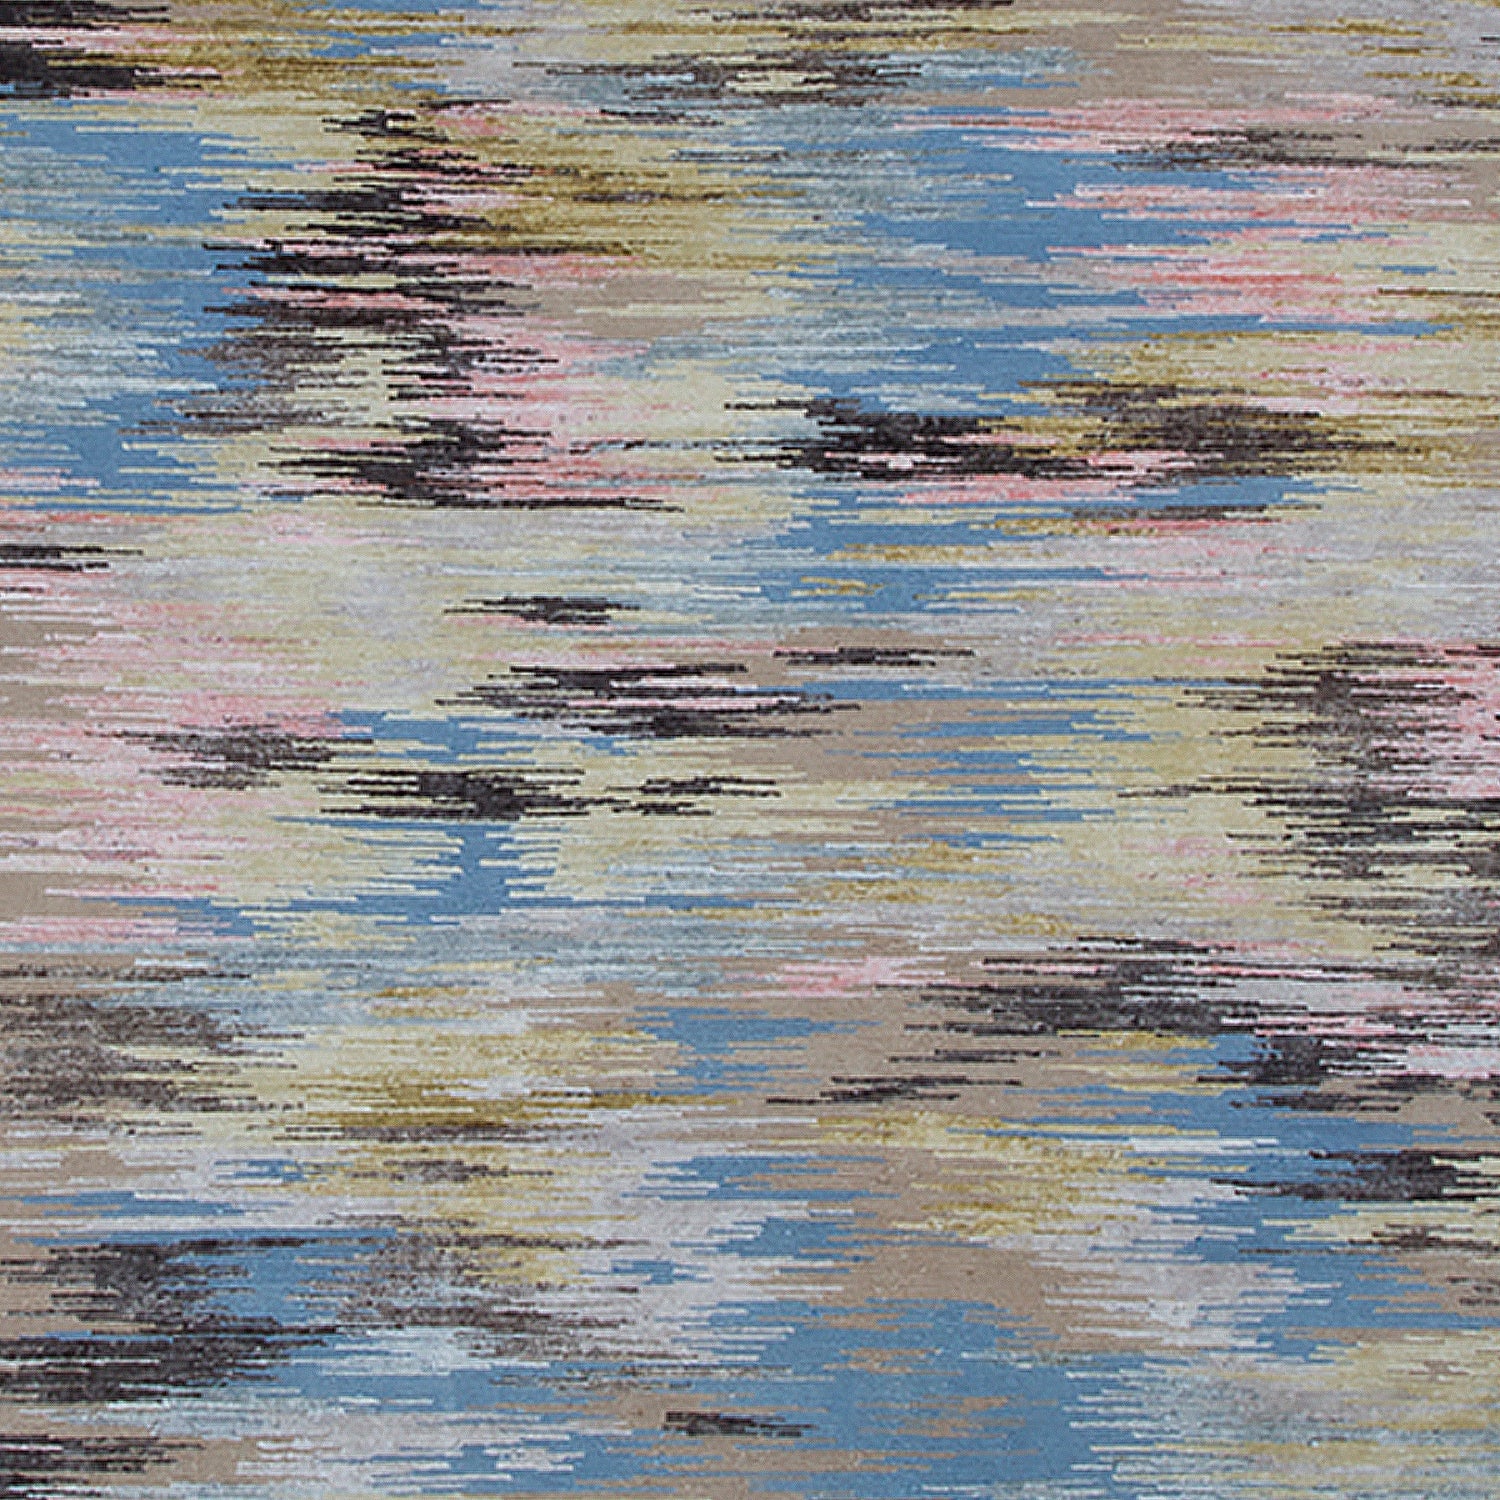 Detail of a woven rug in an abtract stripe pattern reminiscent of a Lily Pond in shades of blue, pink, green and gray.